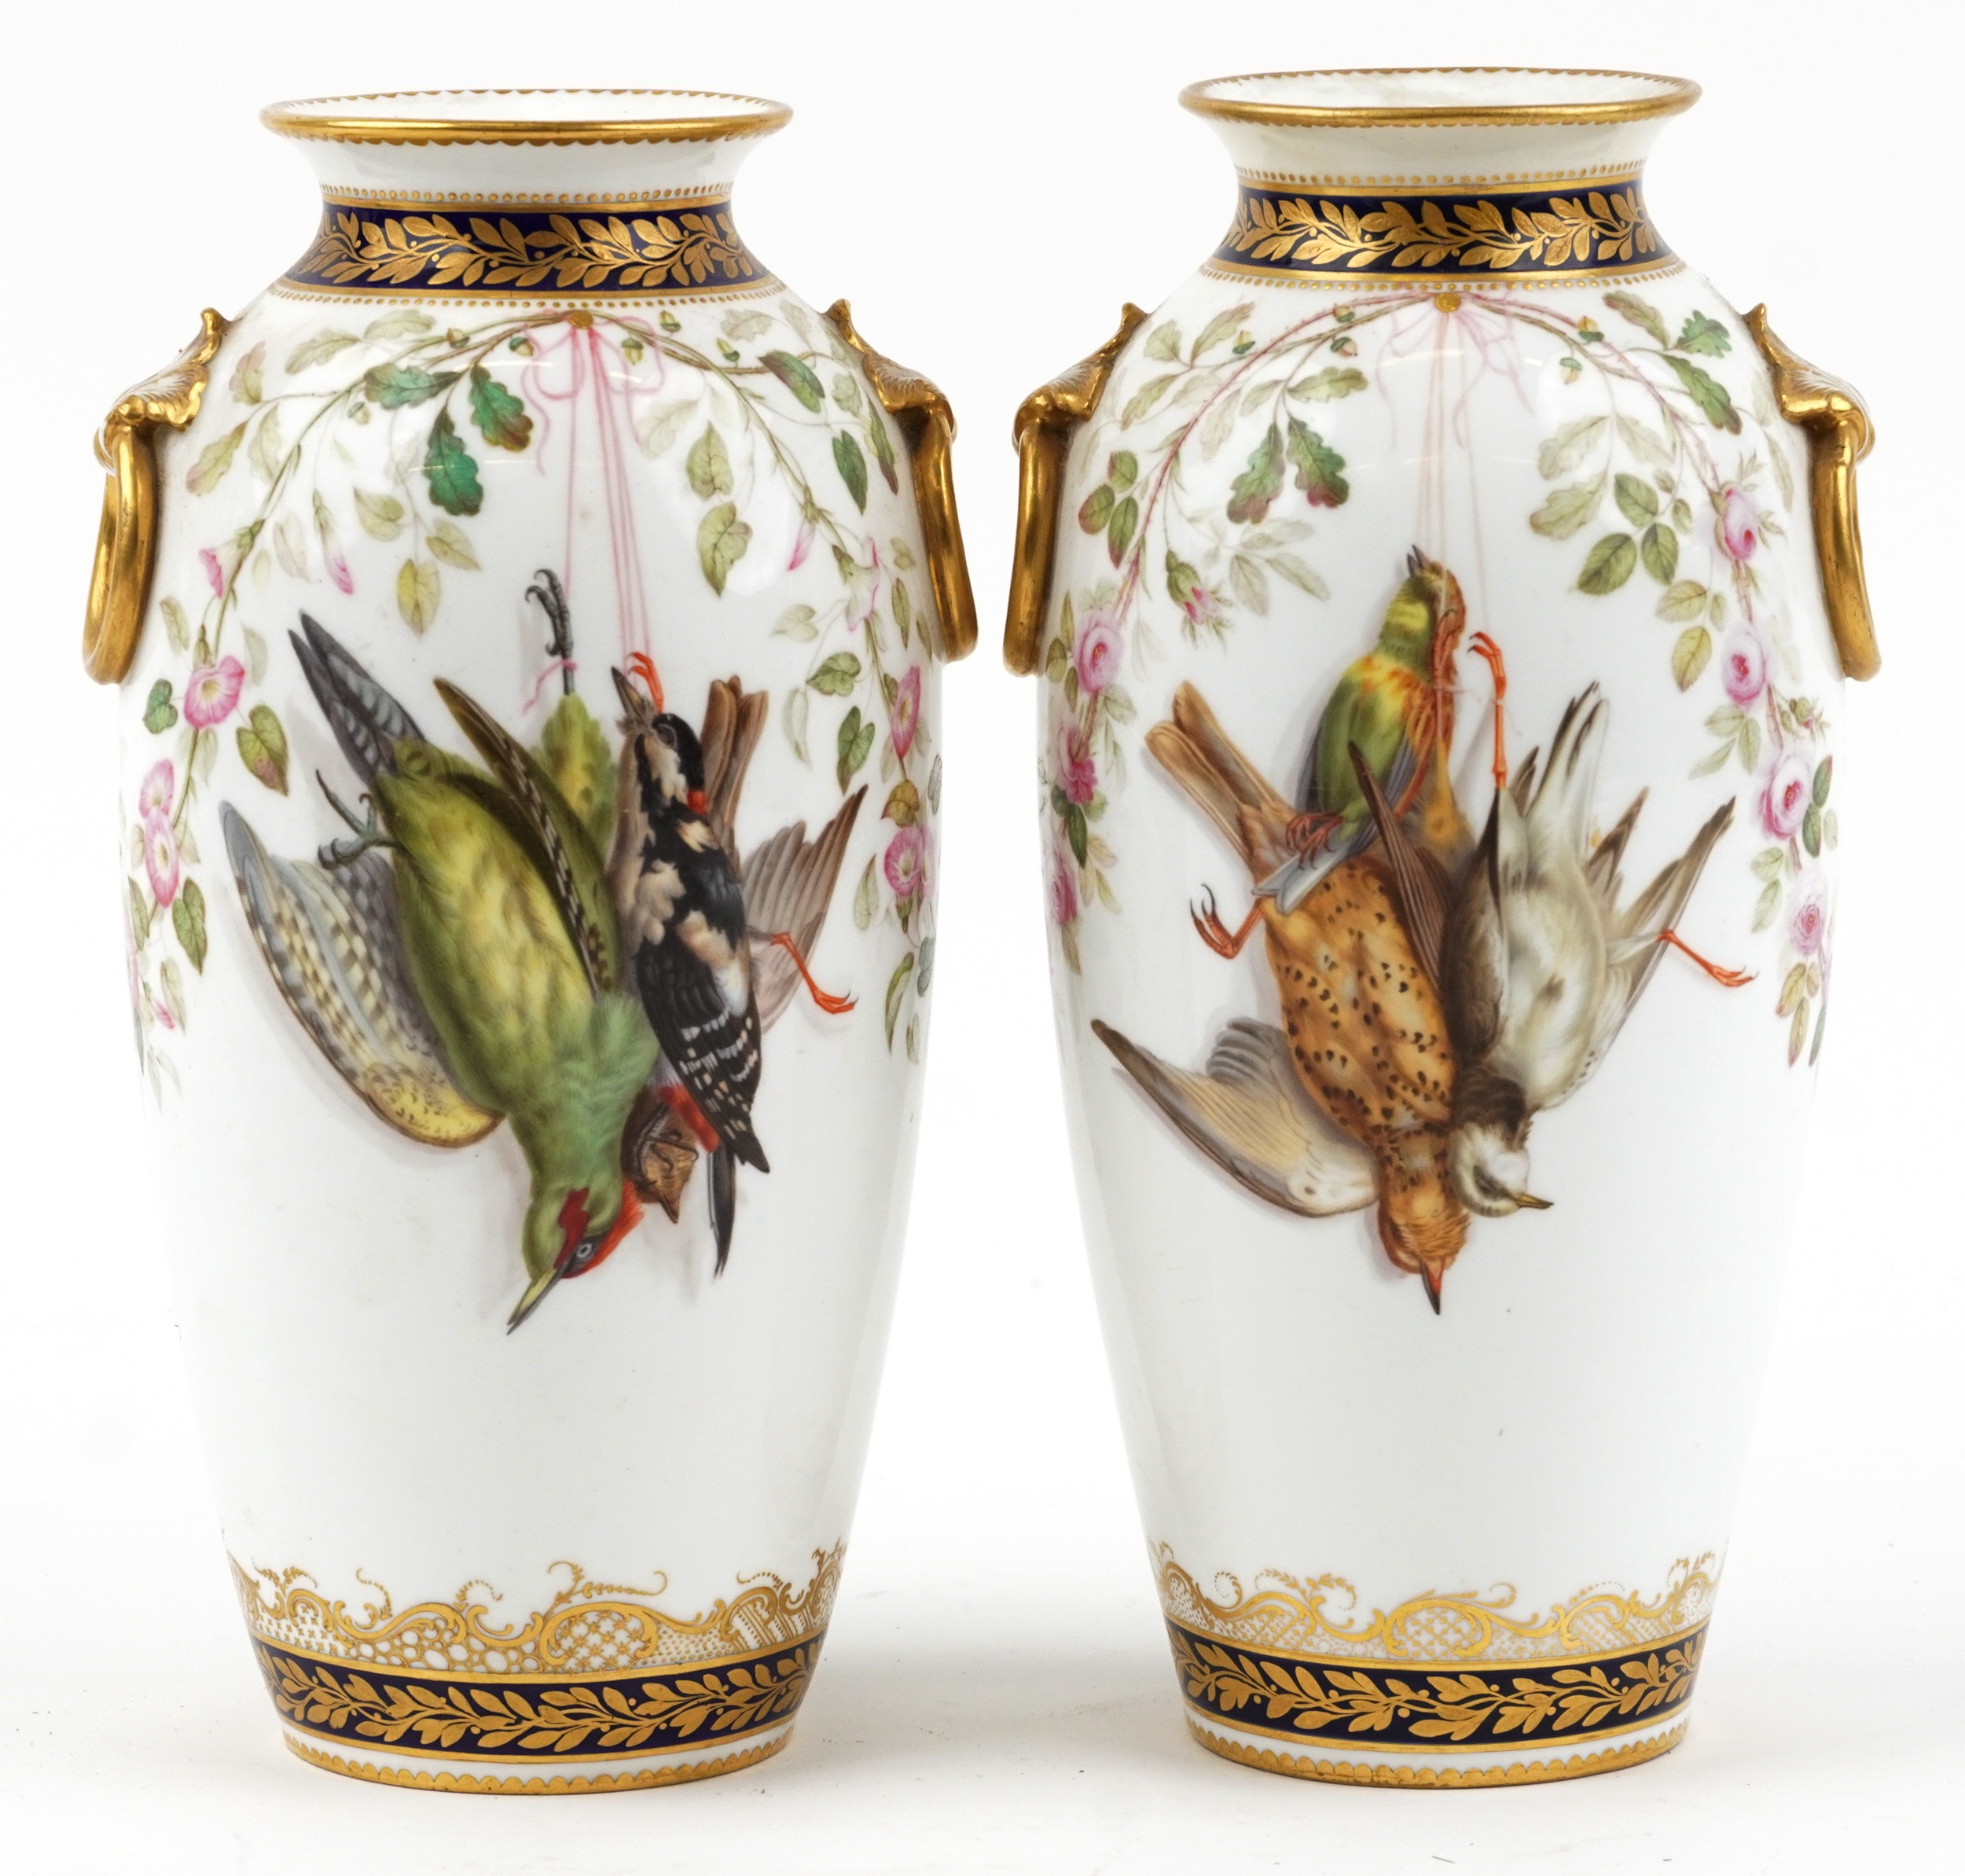 Pair of 19th century European porcelain vases with ring turned handles hand painted with hanging - Image 2 of 4